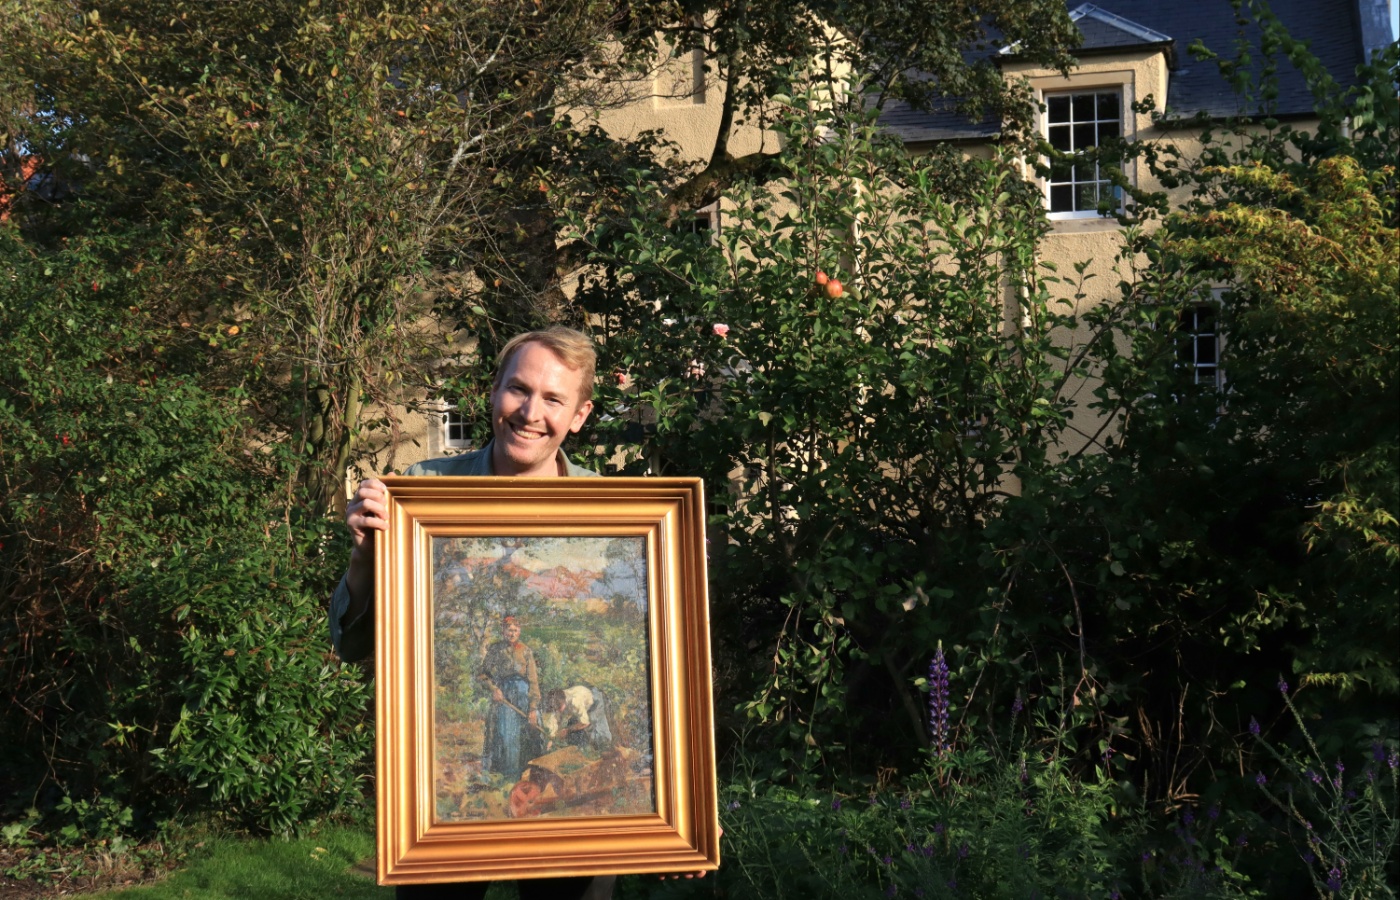 Orchard Croft owner Matt Kirkbride poses with a painting from David Alison in the garden where it was painted.